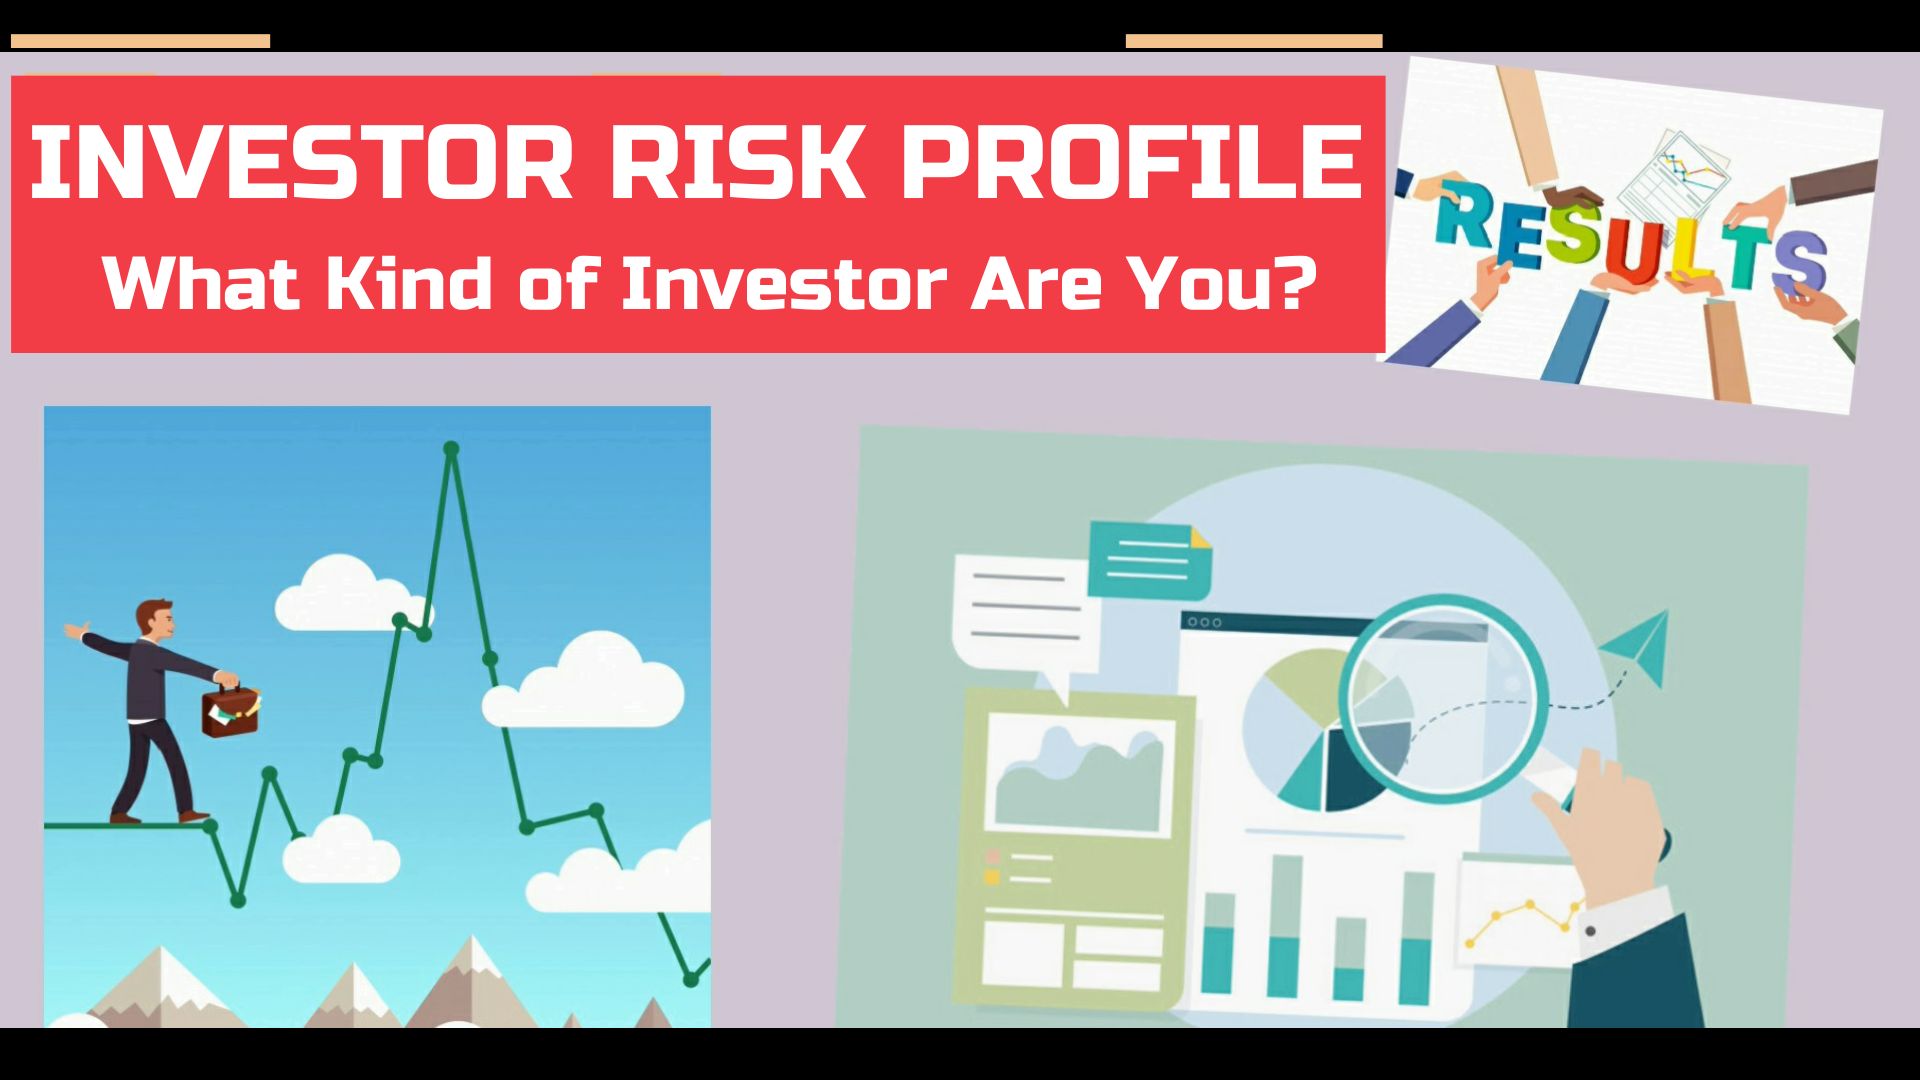 Quiz - What Kind of Investor are You